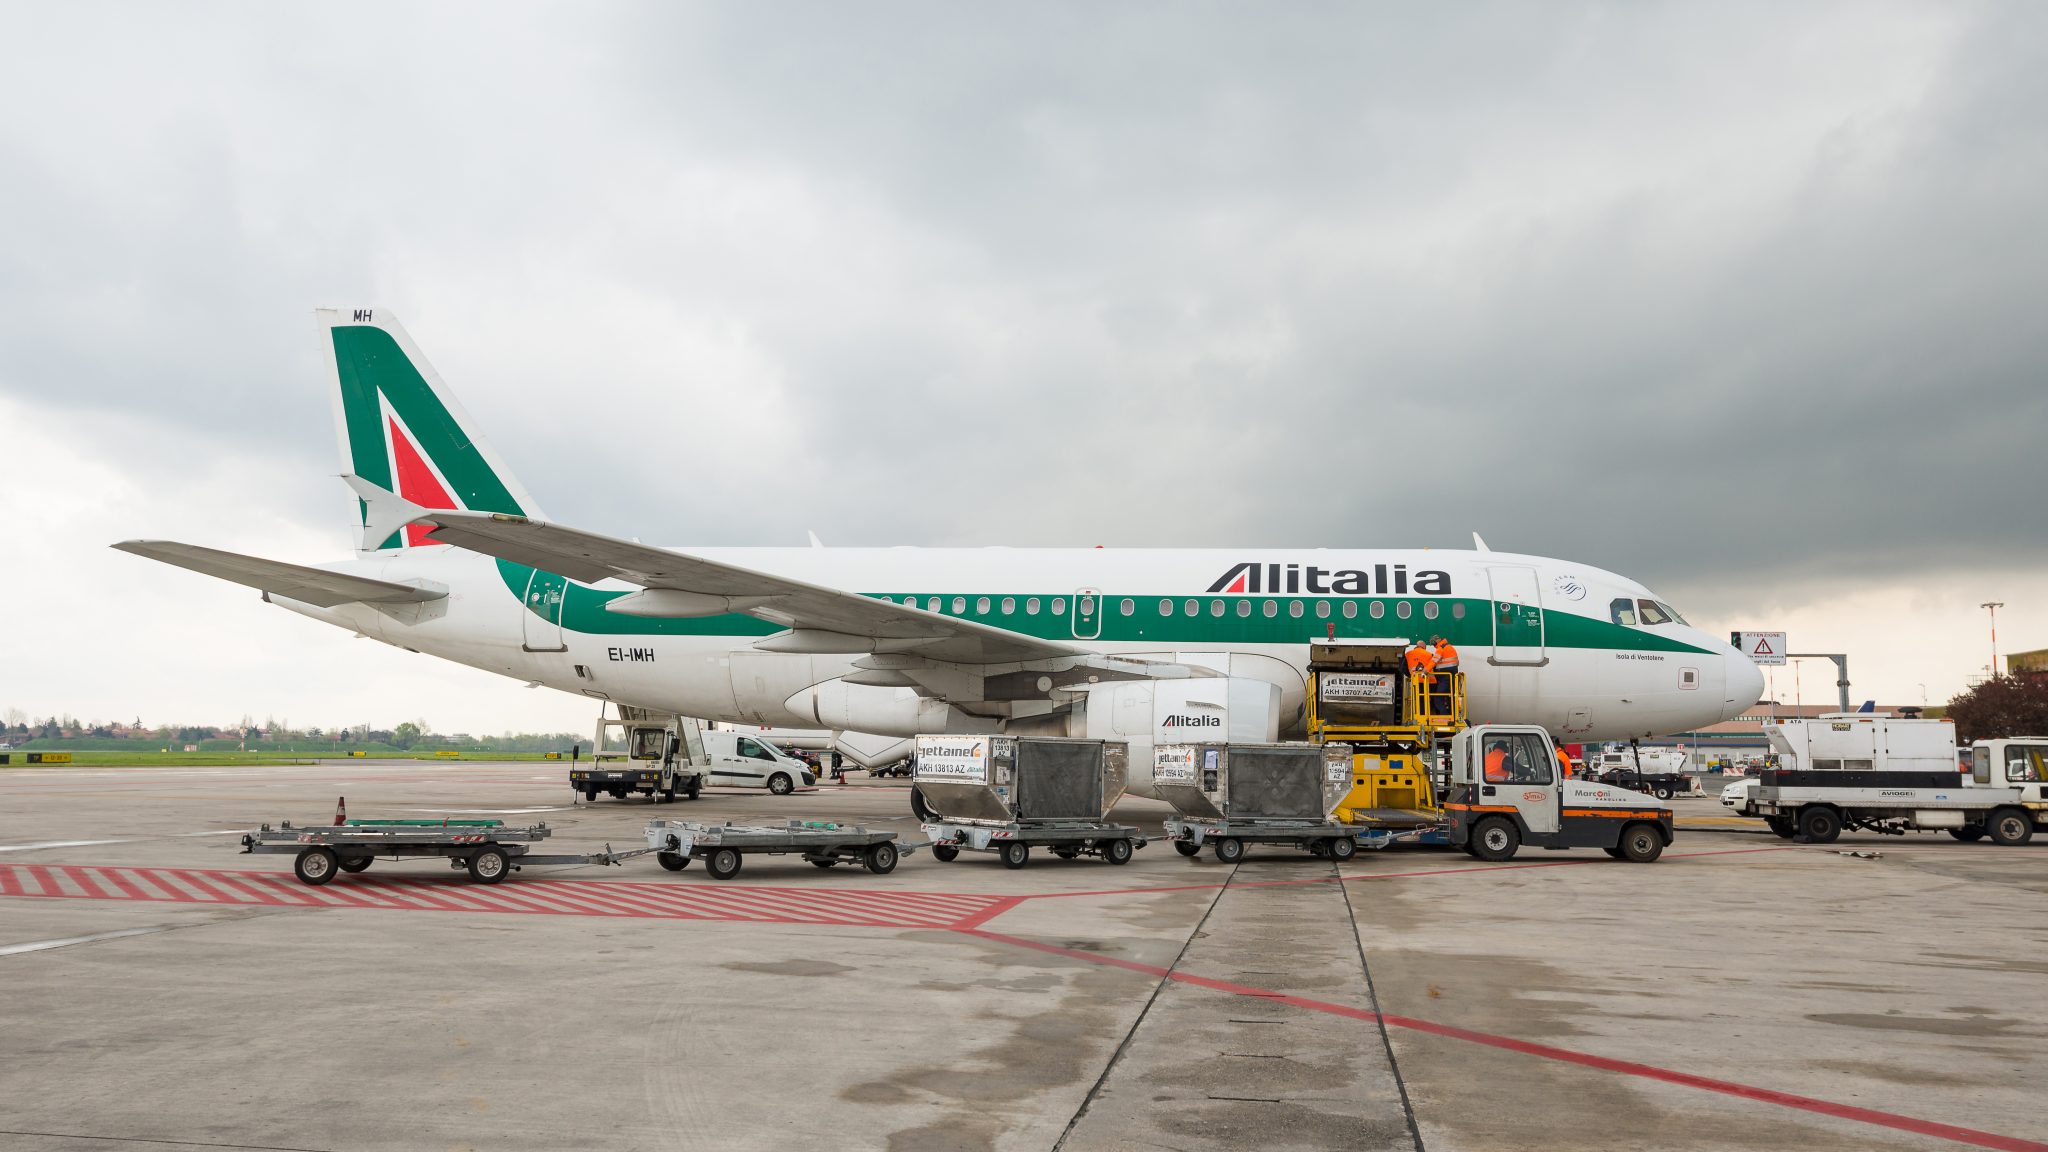 Lufthansa looking to rescue Alitalia with €200 million bid, reports suggest